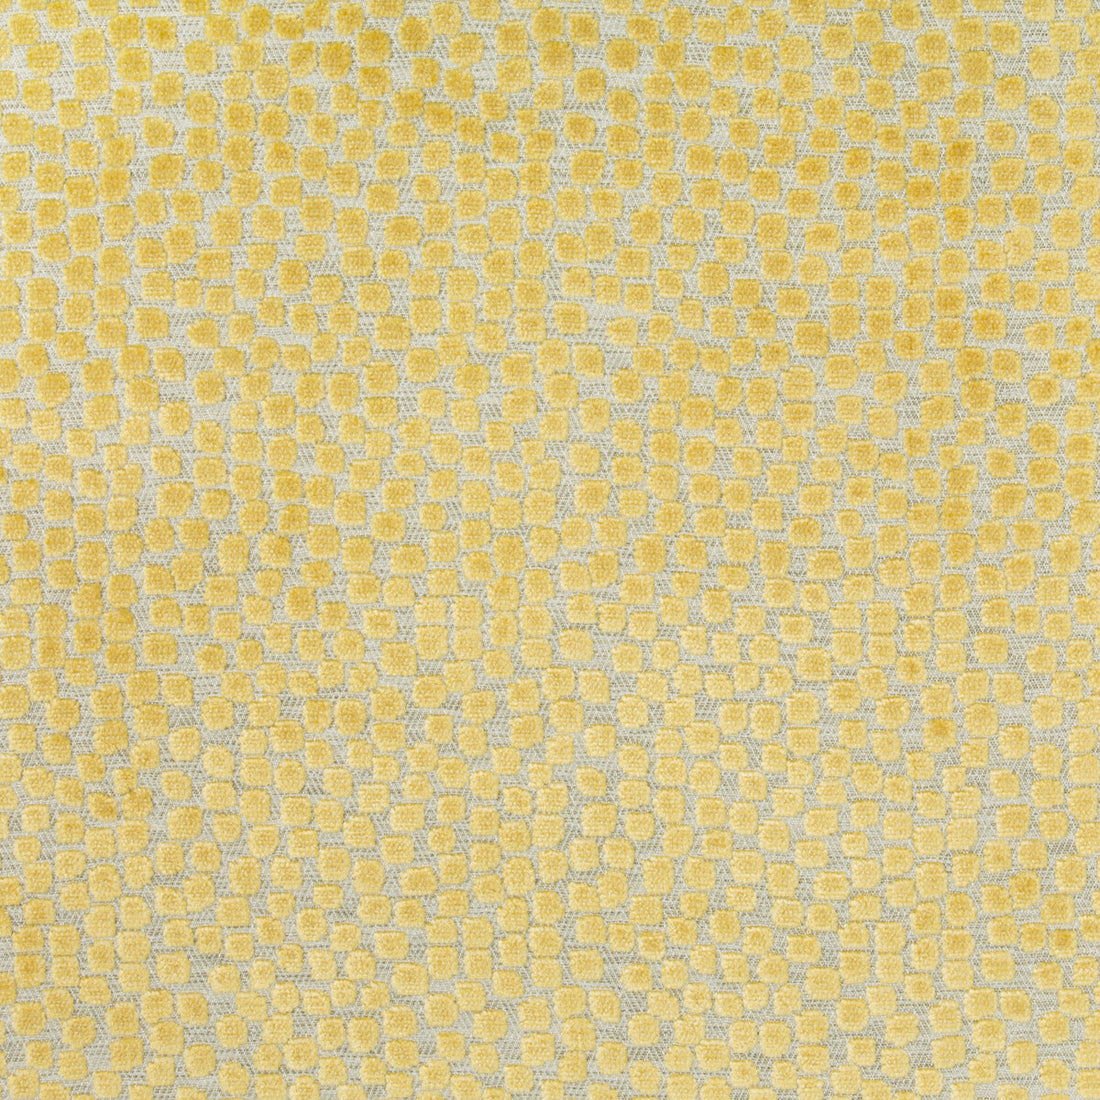 Flurries fabric in citrine color - pattern 34849.40.0 - by Kravet Design in the Thom Filicia Altitude collection